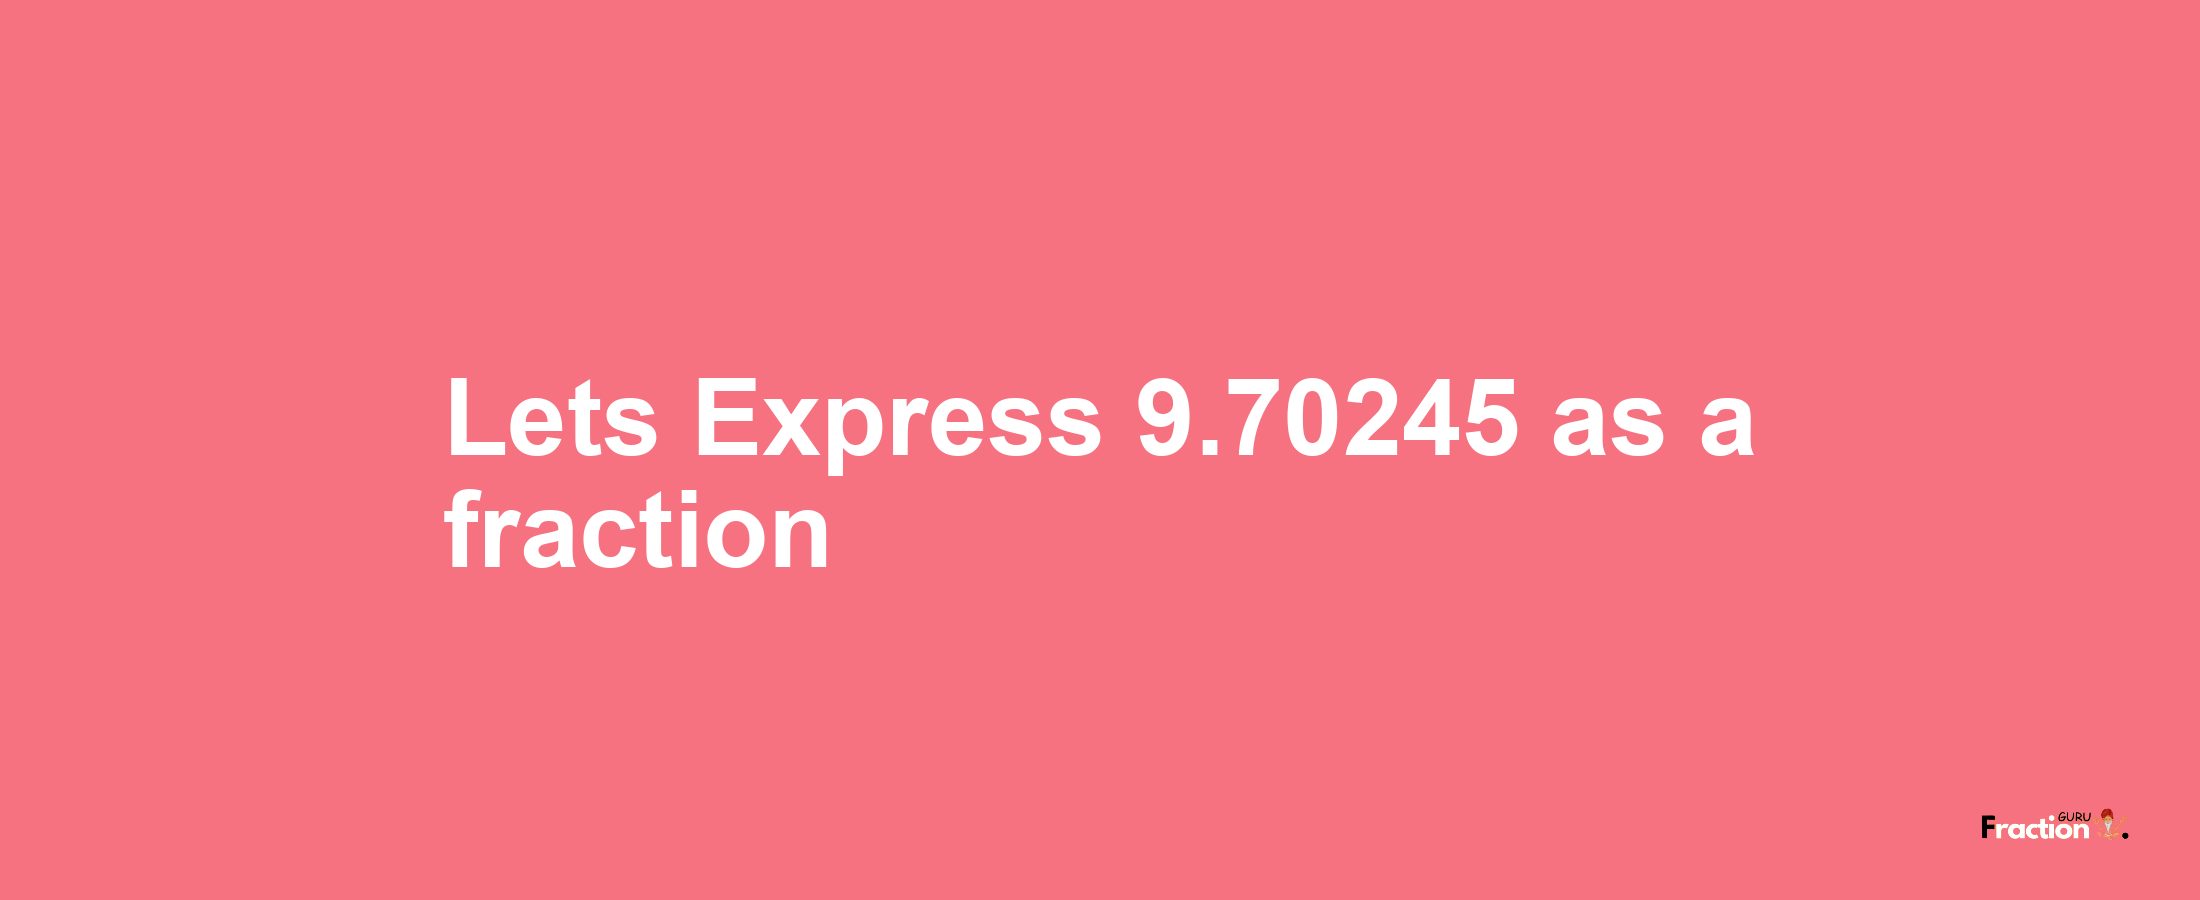 Lets Express 9.70245 as afraction